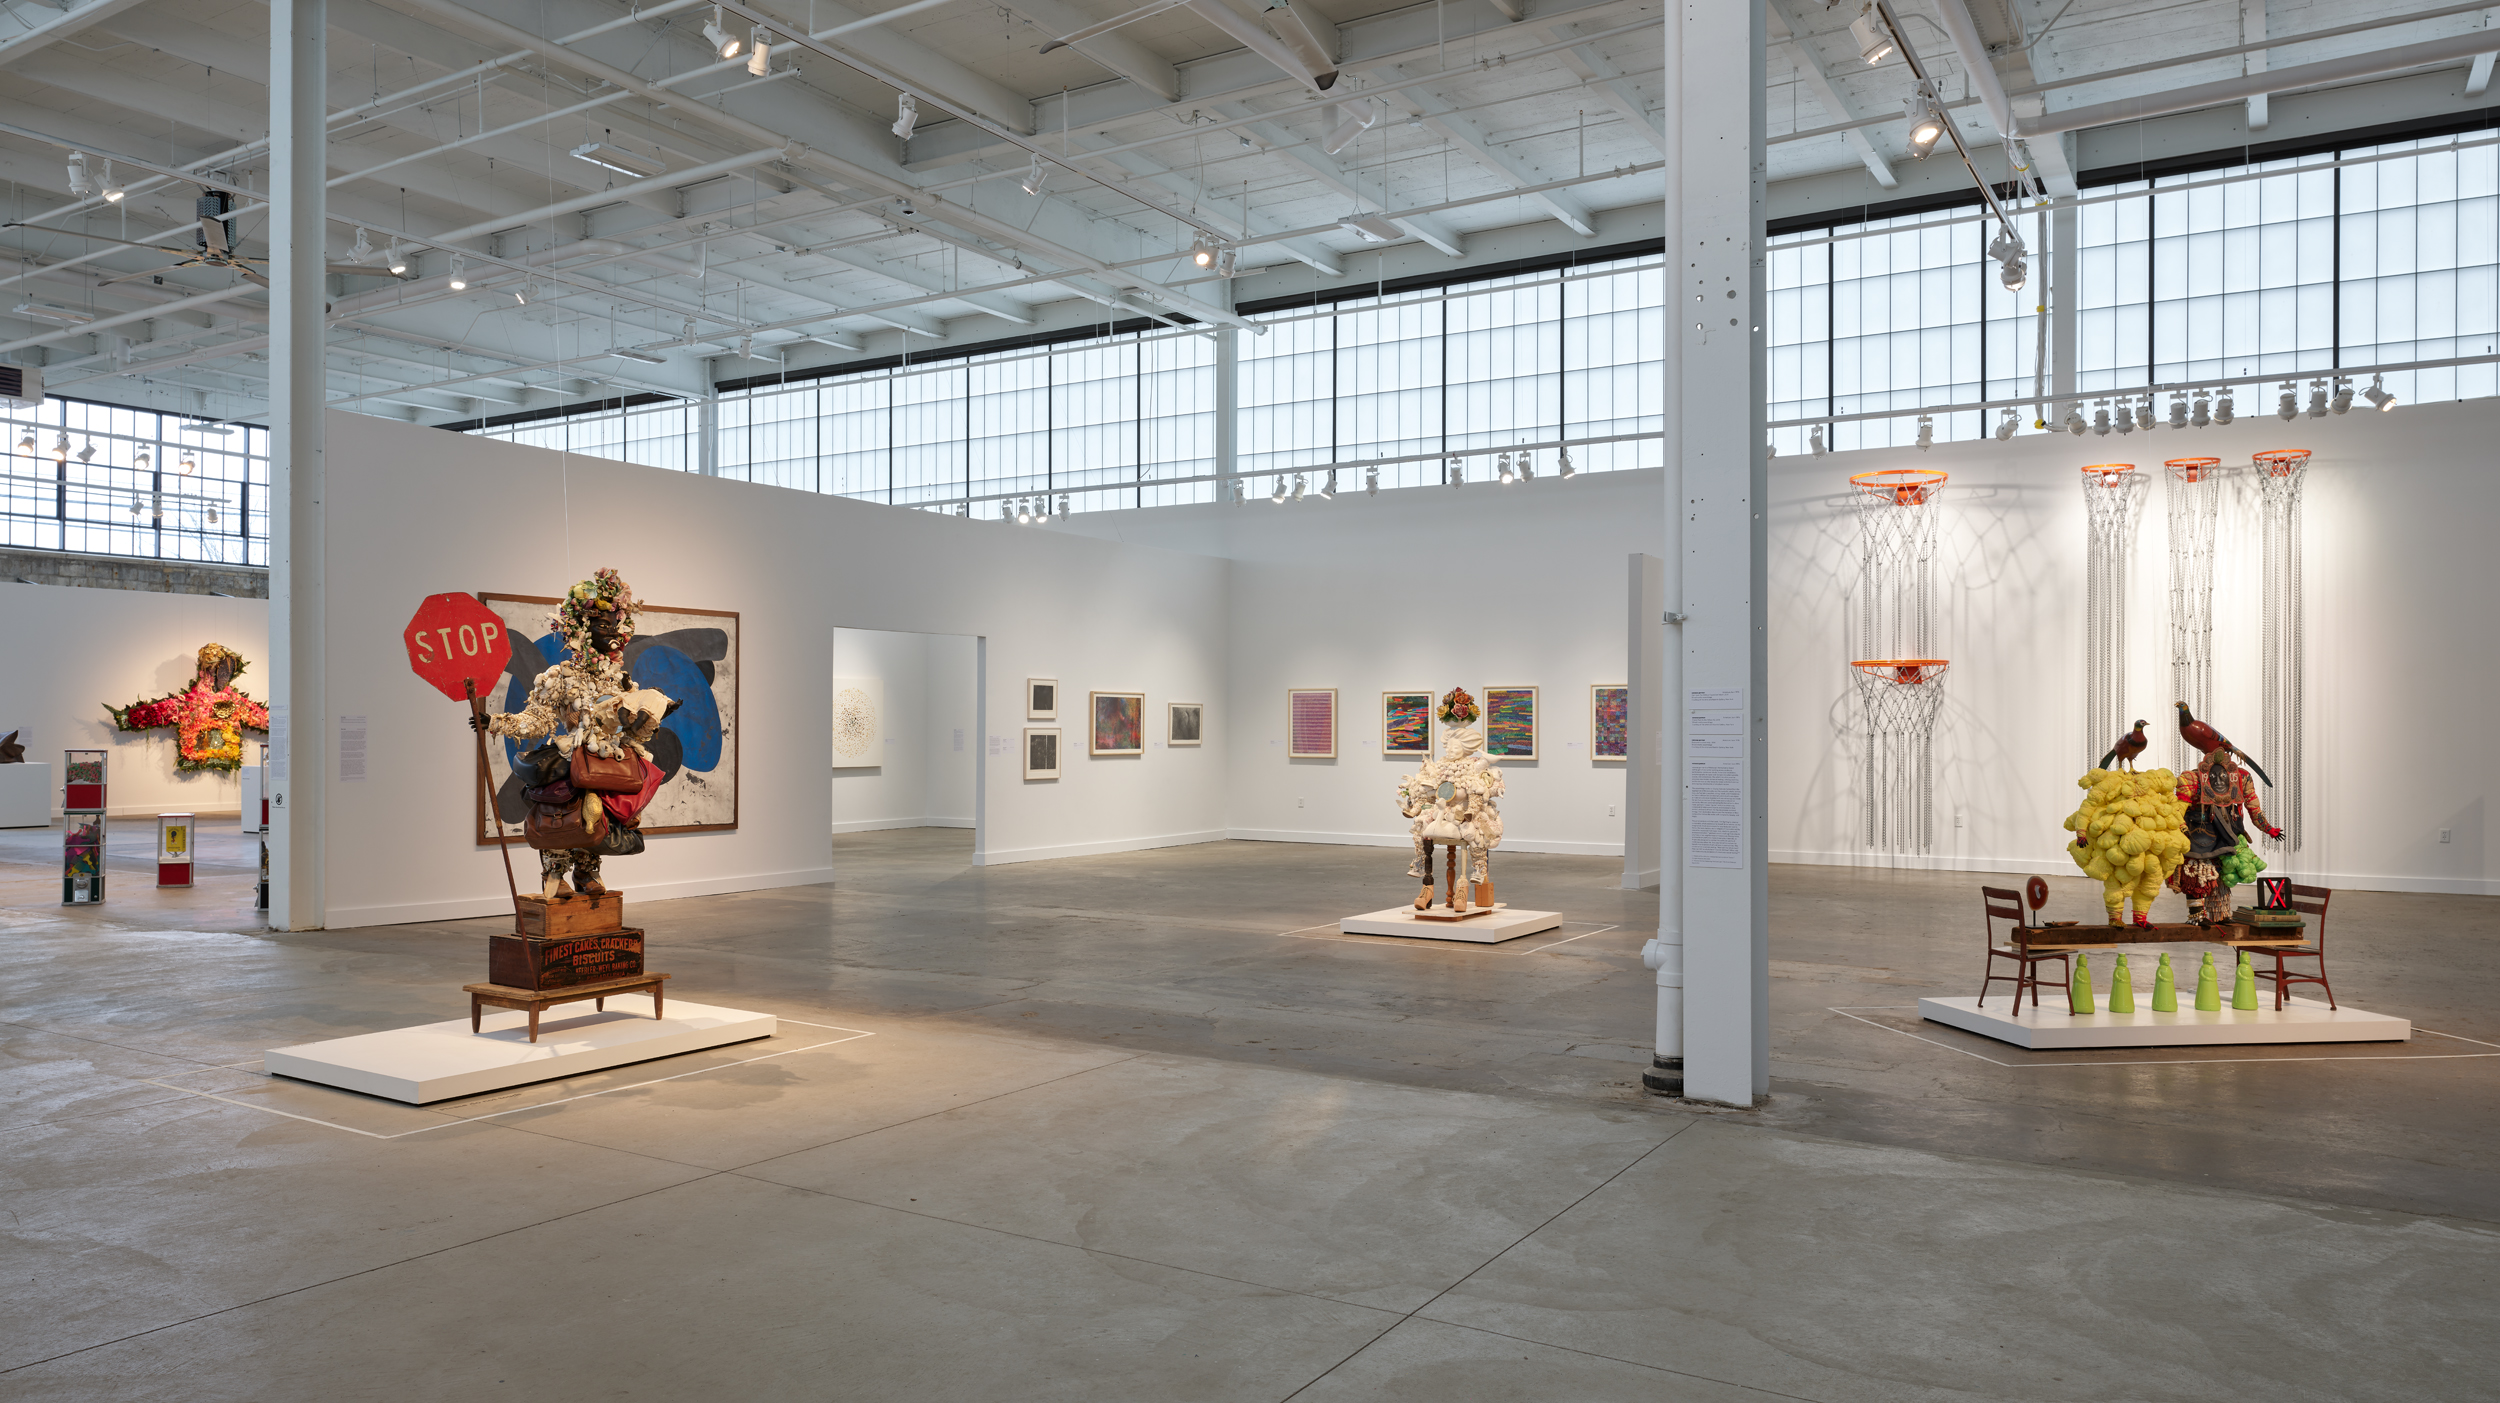 An installation view of sculptures, paintings, and installation artworks in a large industrial gallery space